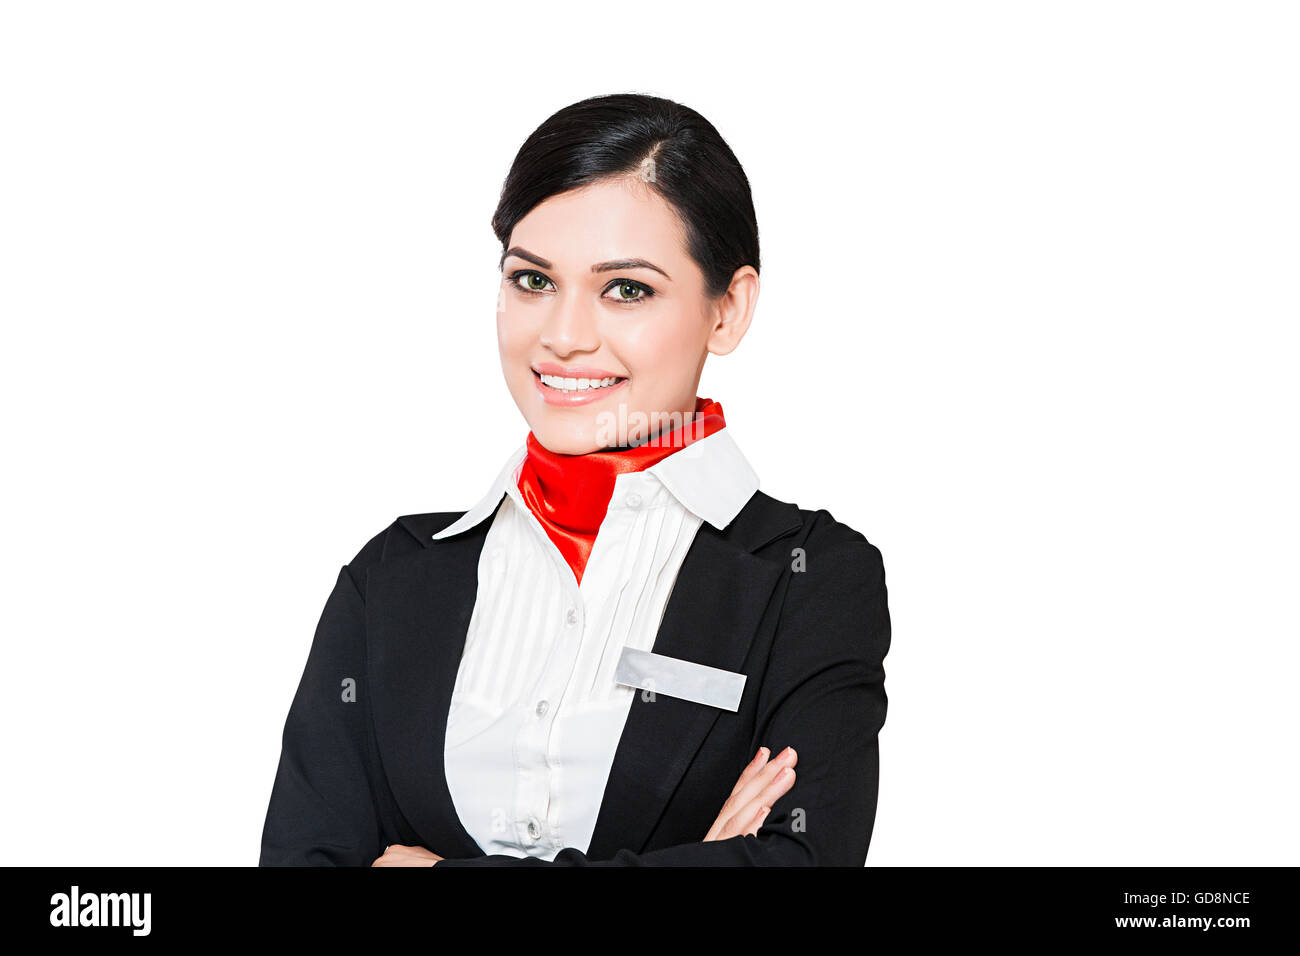 1 Indian Adult Woman Air Hostess Arms Crossed standing pose Stock Photo